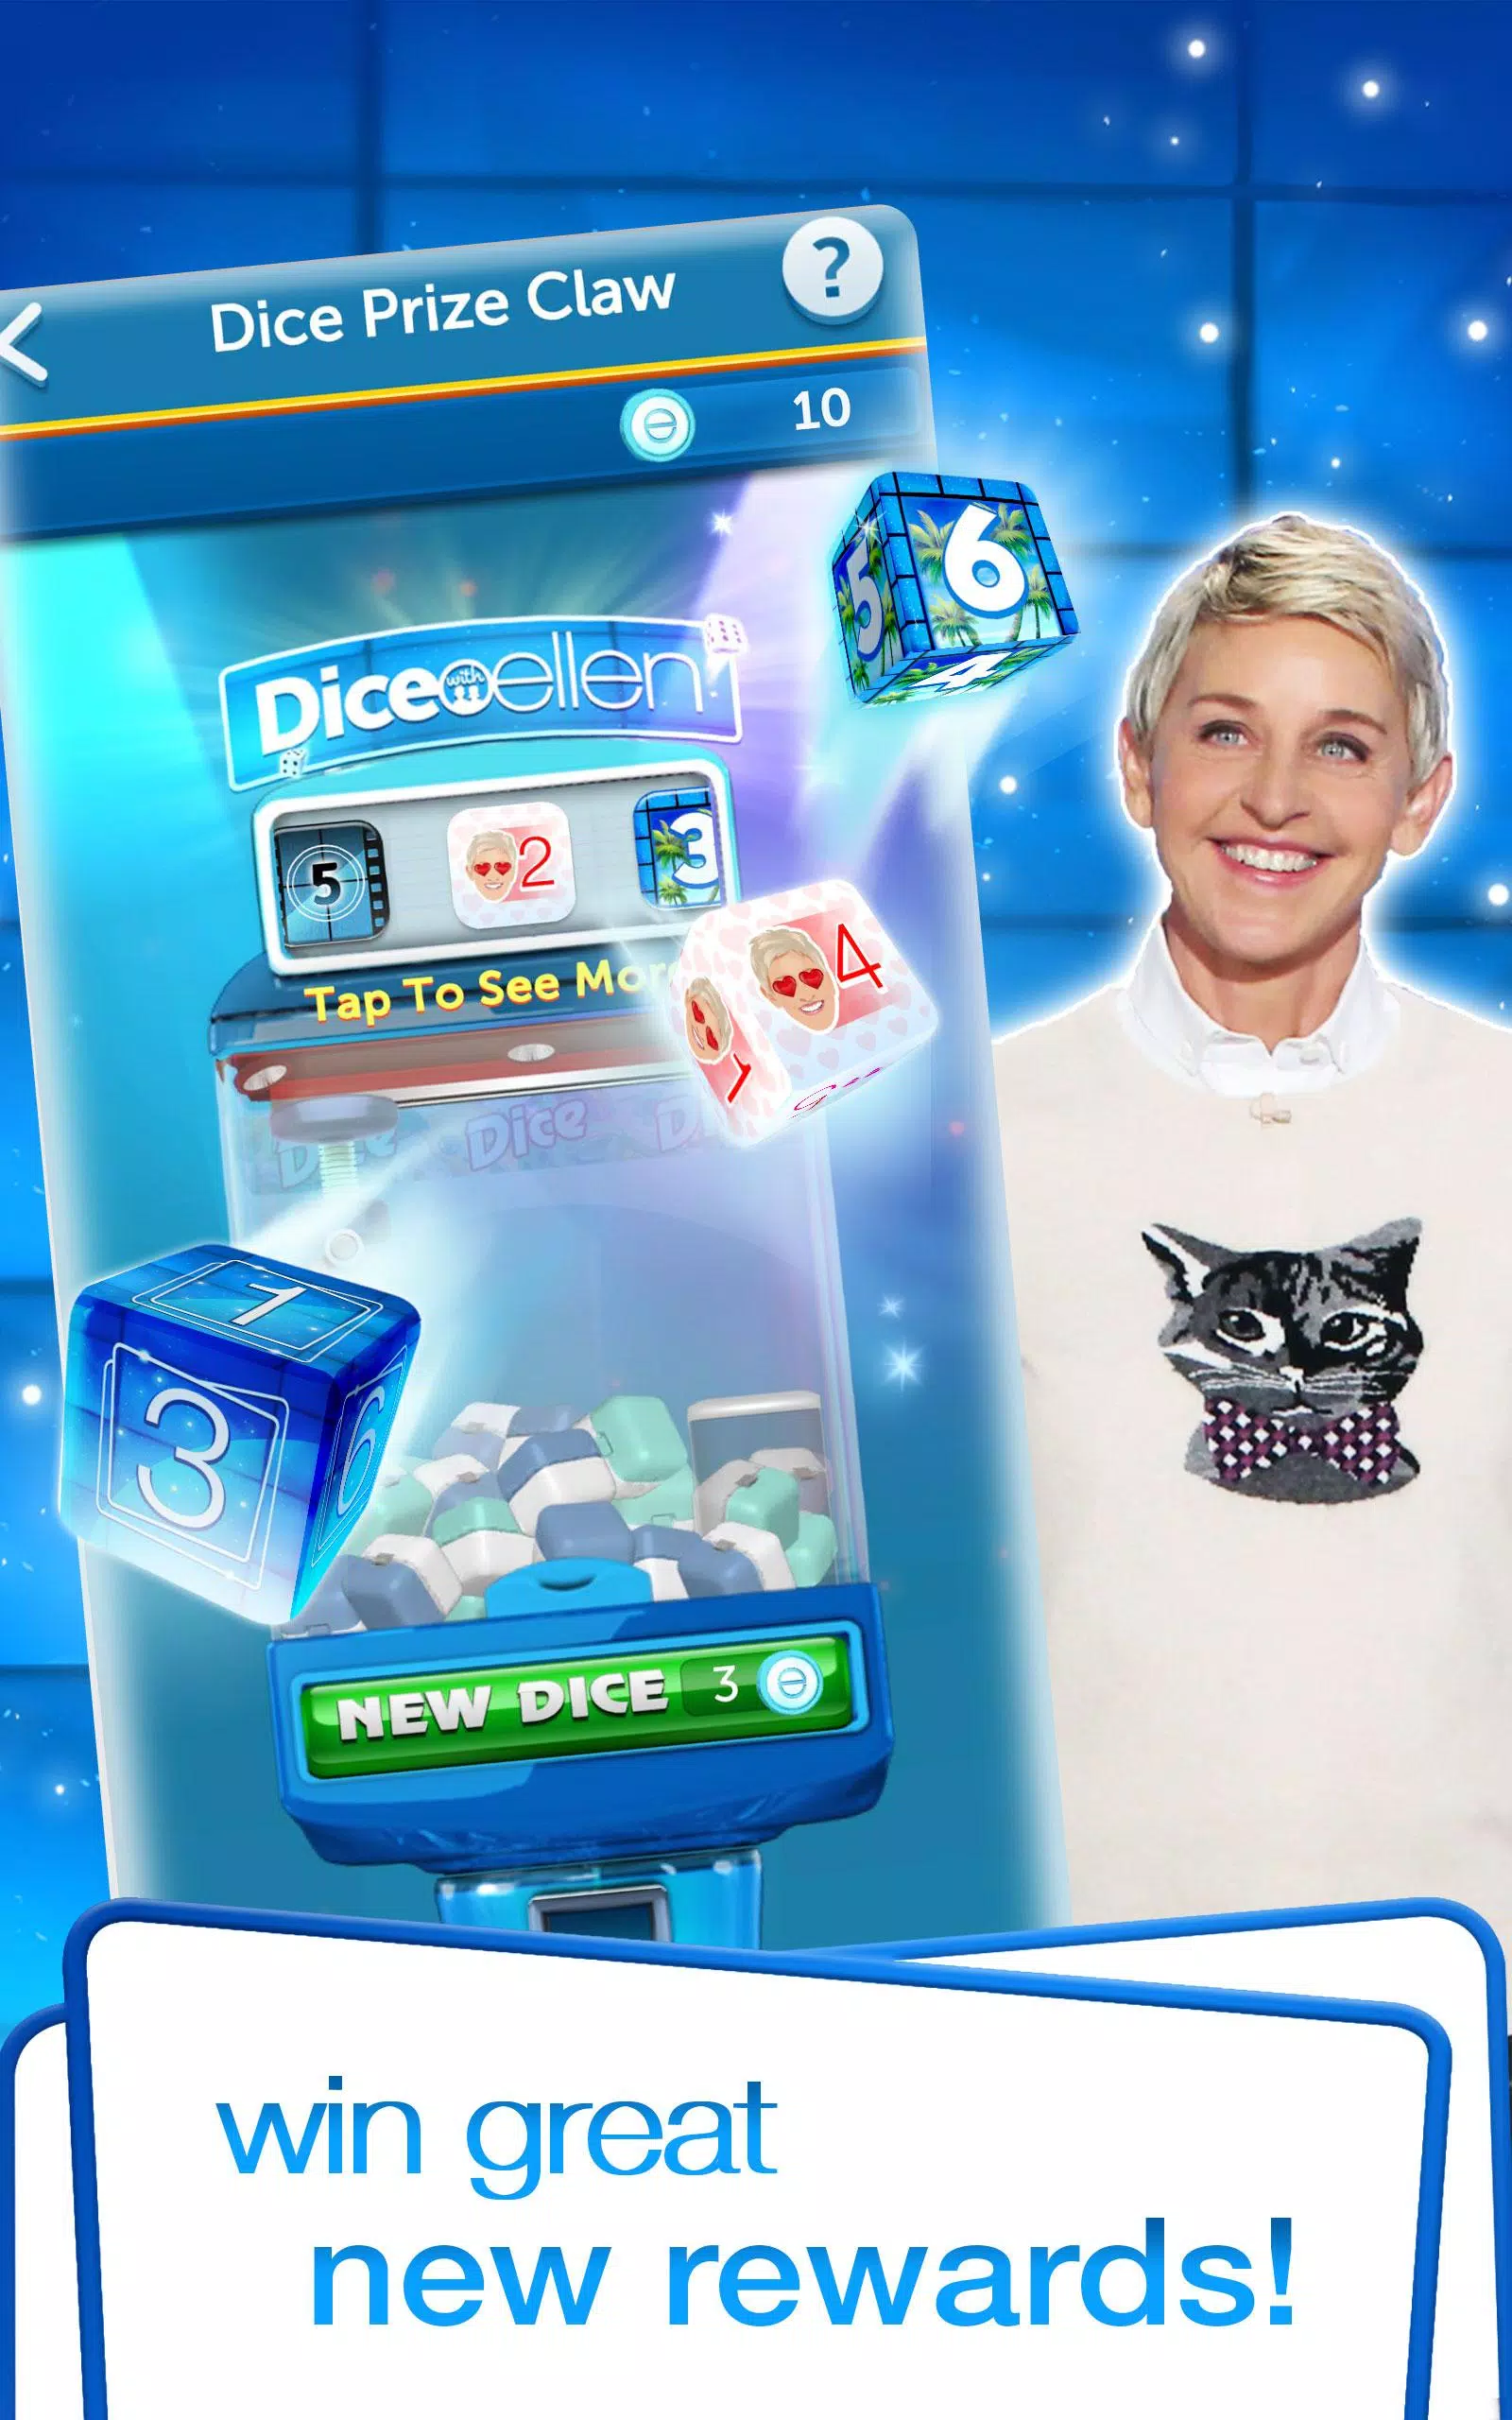 Dice with Ellen for Android - APK Download